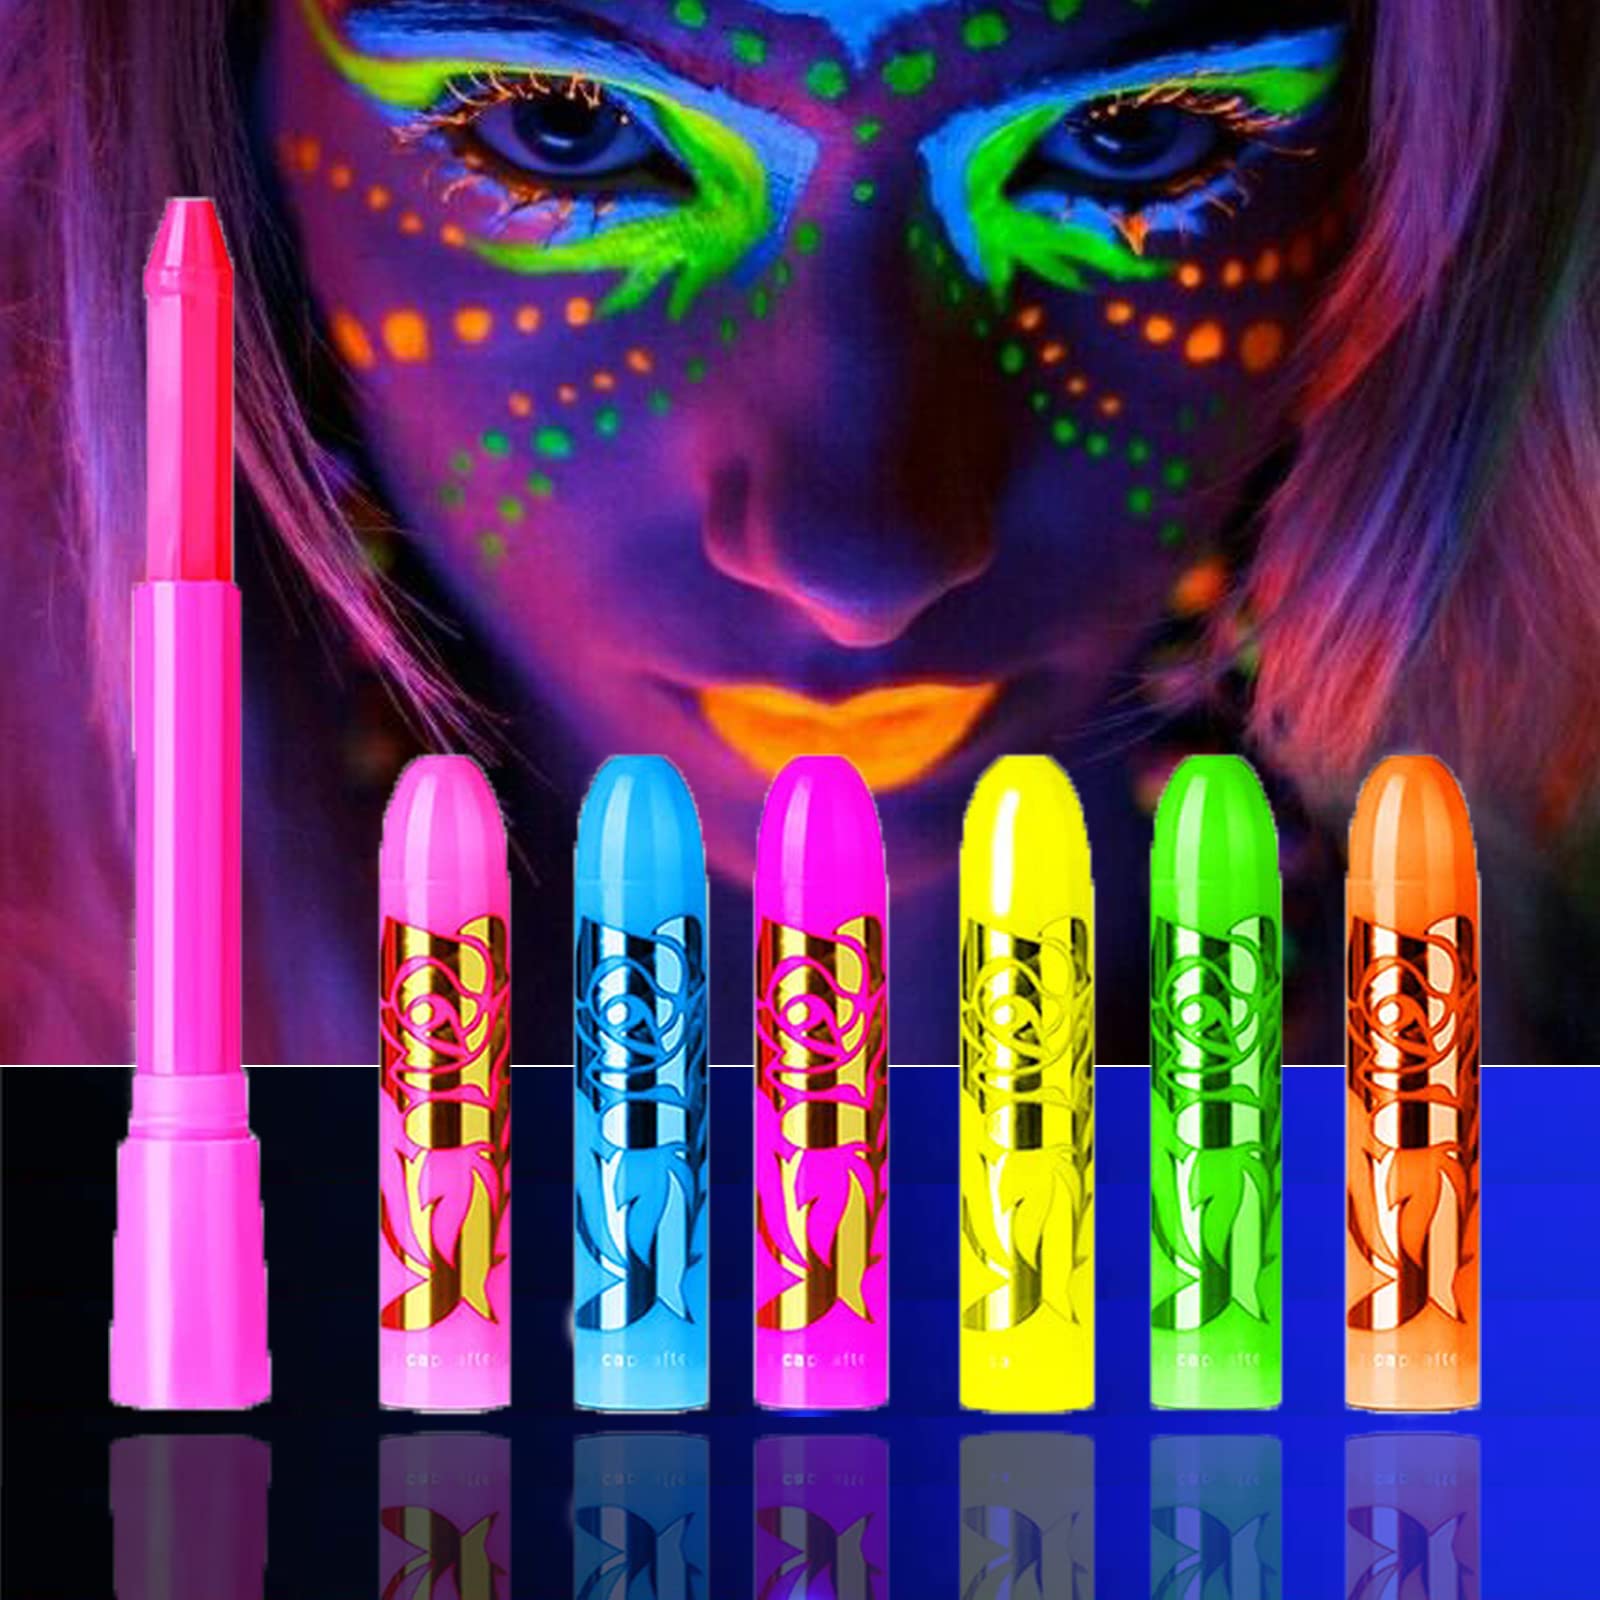 The Best UV Body Paint - Glows Under Blacklight - Made in USA